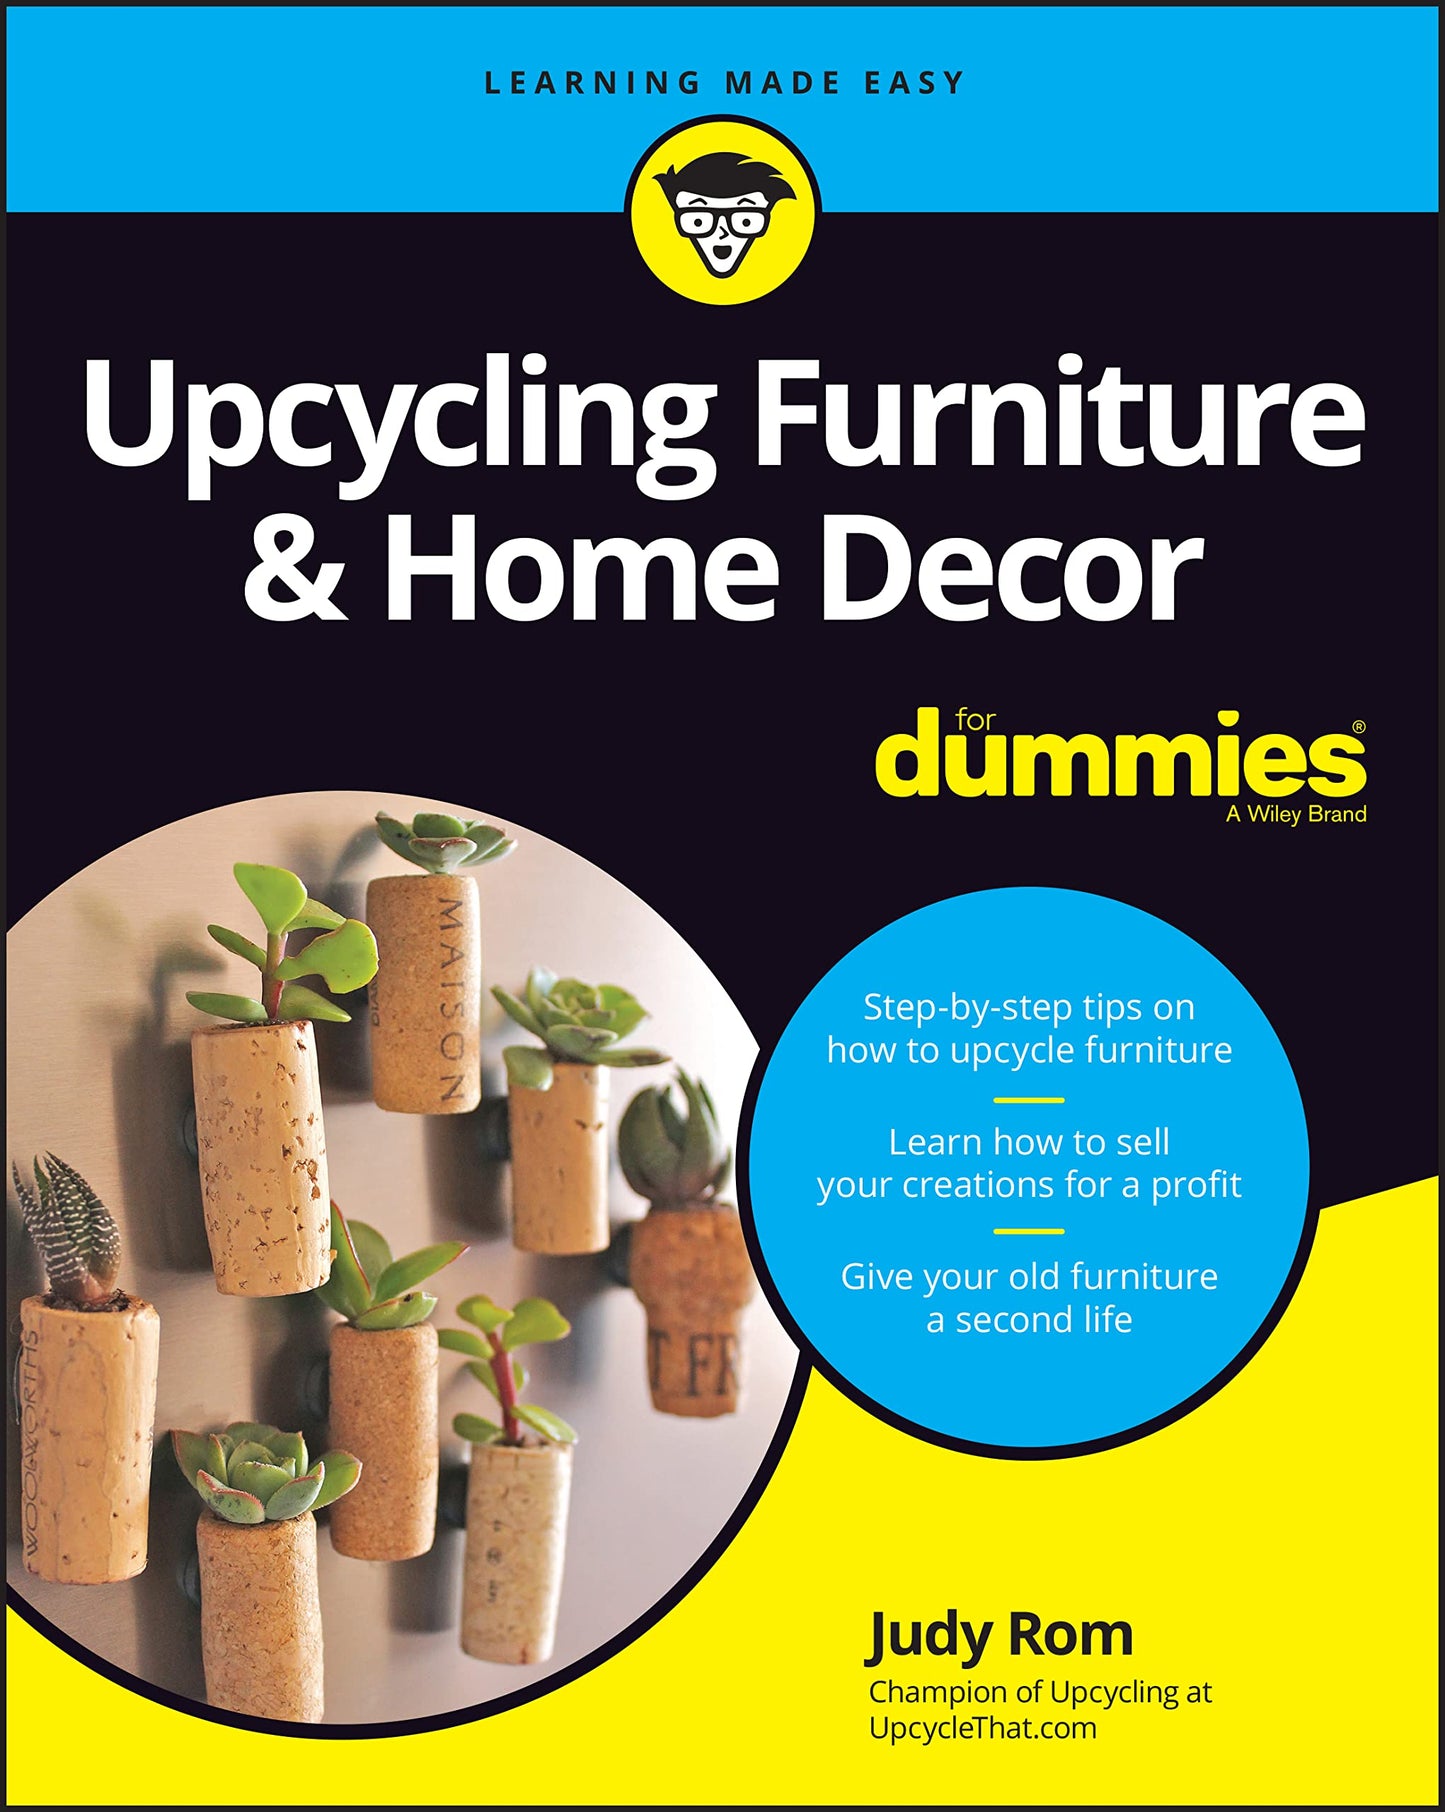 Upcycling Furniture & Home Decor for Dummies | Book